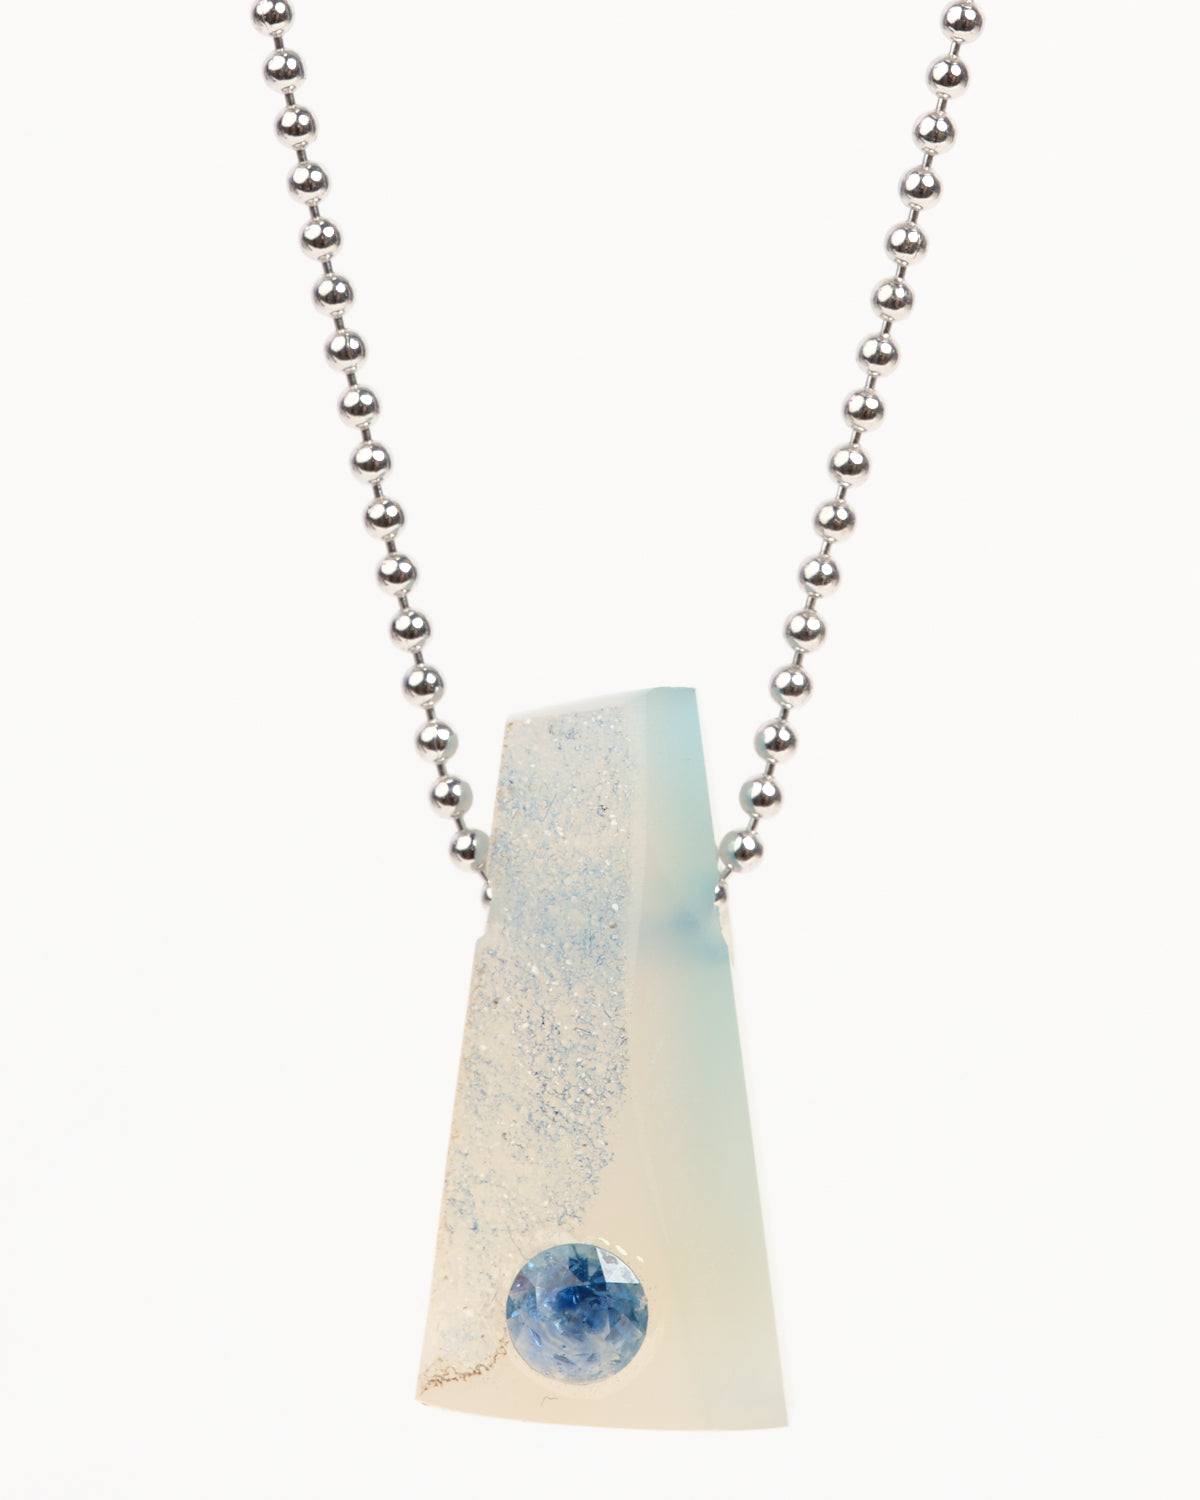 Druzy Agate with Sapphire Pendant